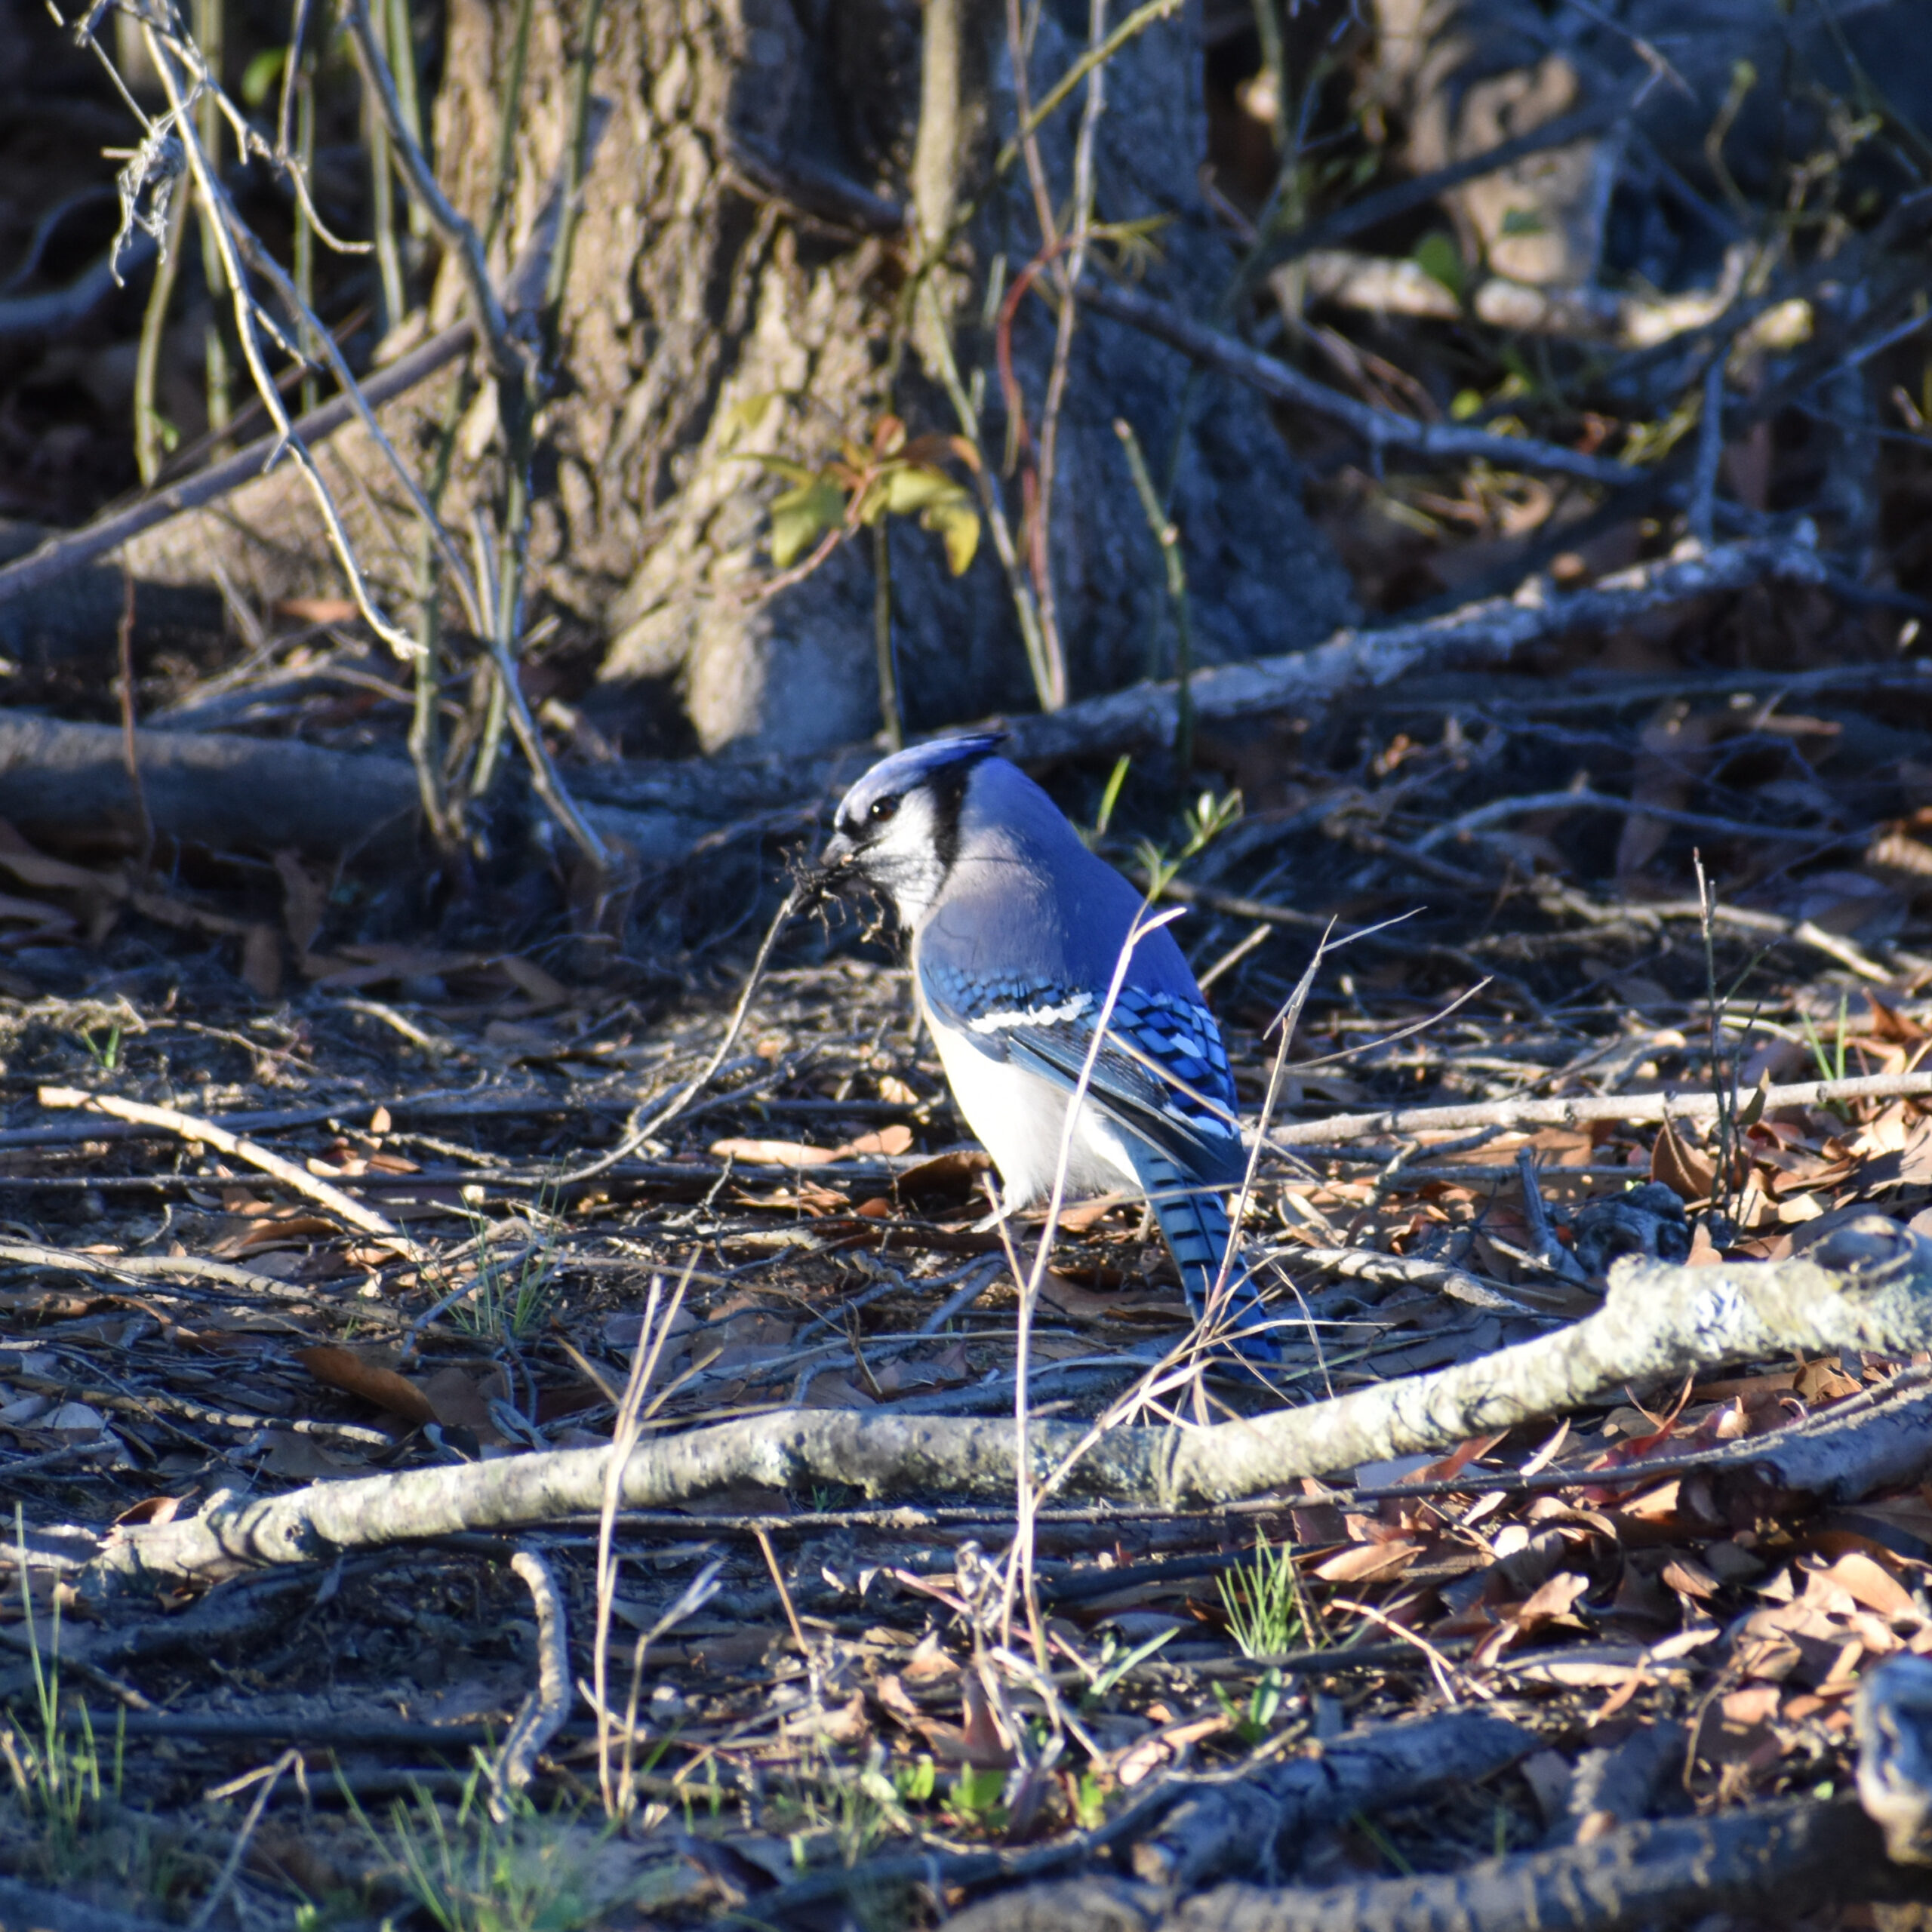 A bird with blue wings, a blue tail with black stripes, and light grey underbelly, stands on the ground with small twigs in its mouth.